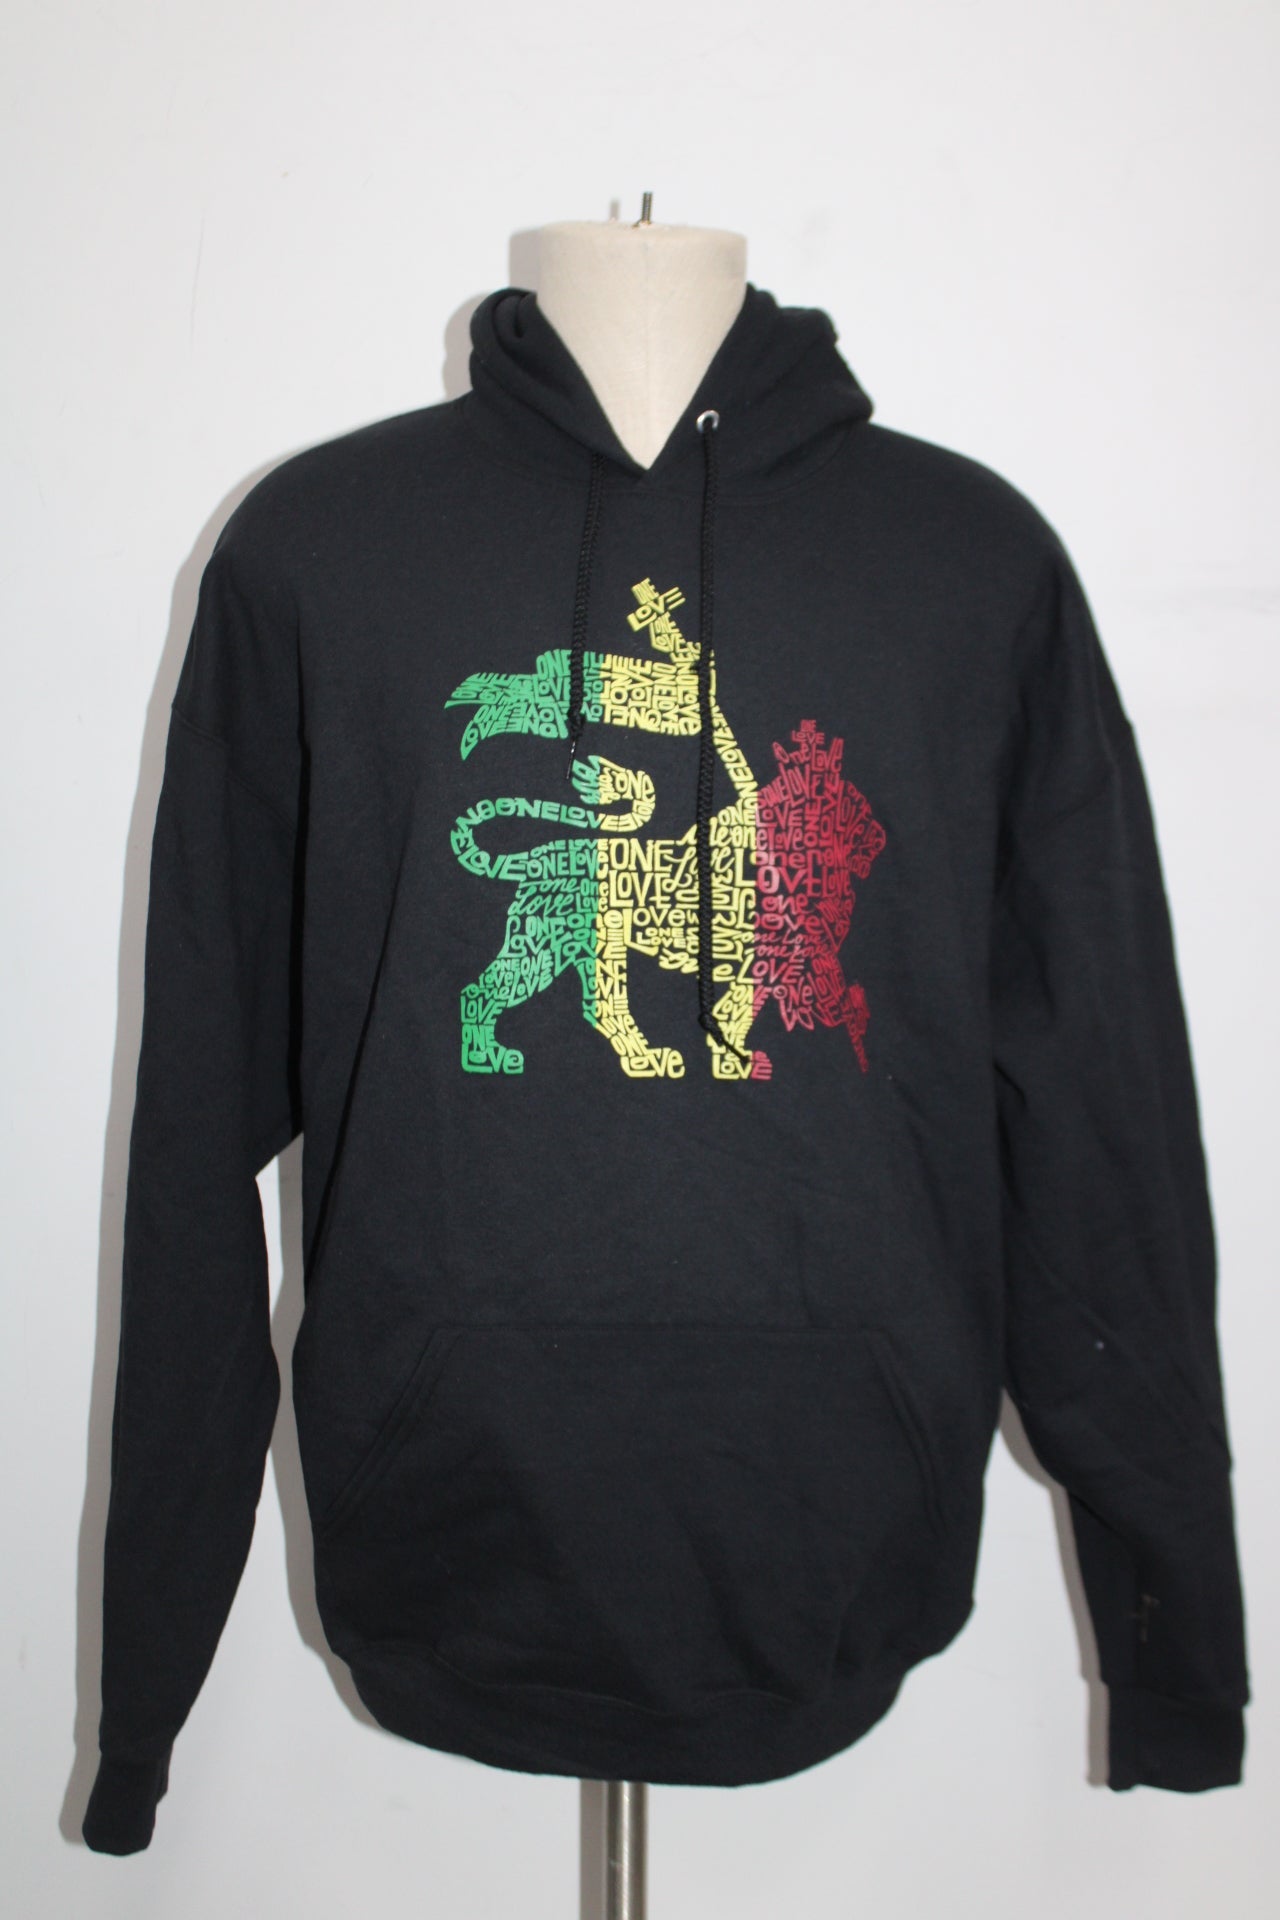 LOS ANGELES POP ART MENS HOODIE, BLACK, XL - NEW WITHOUT TAG